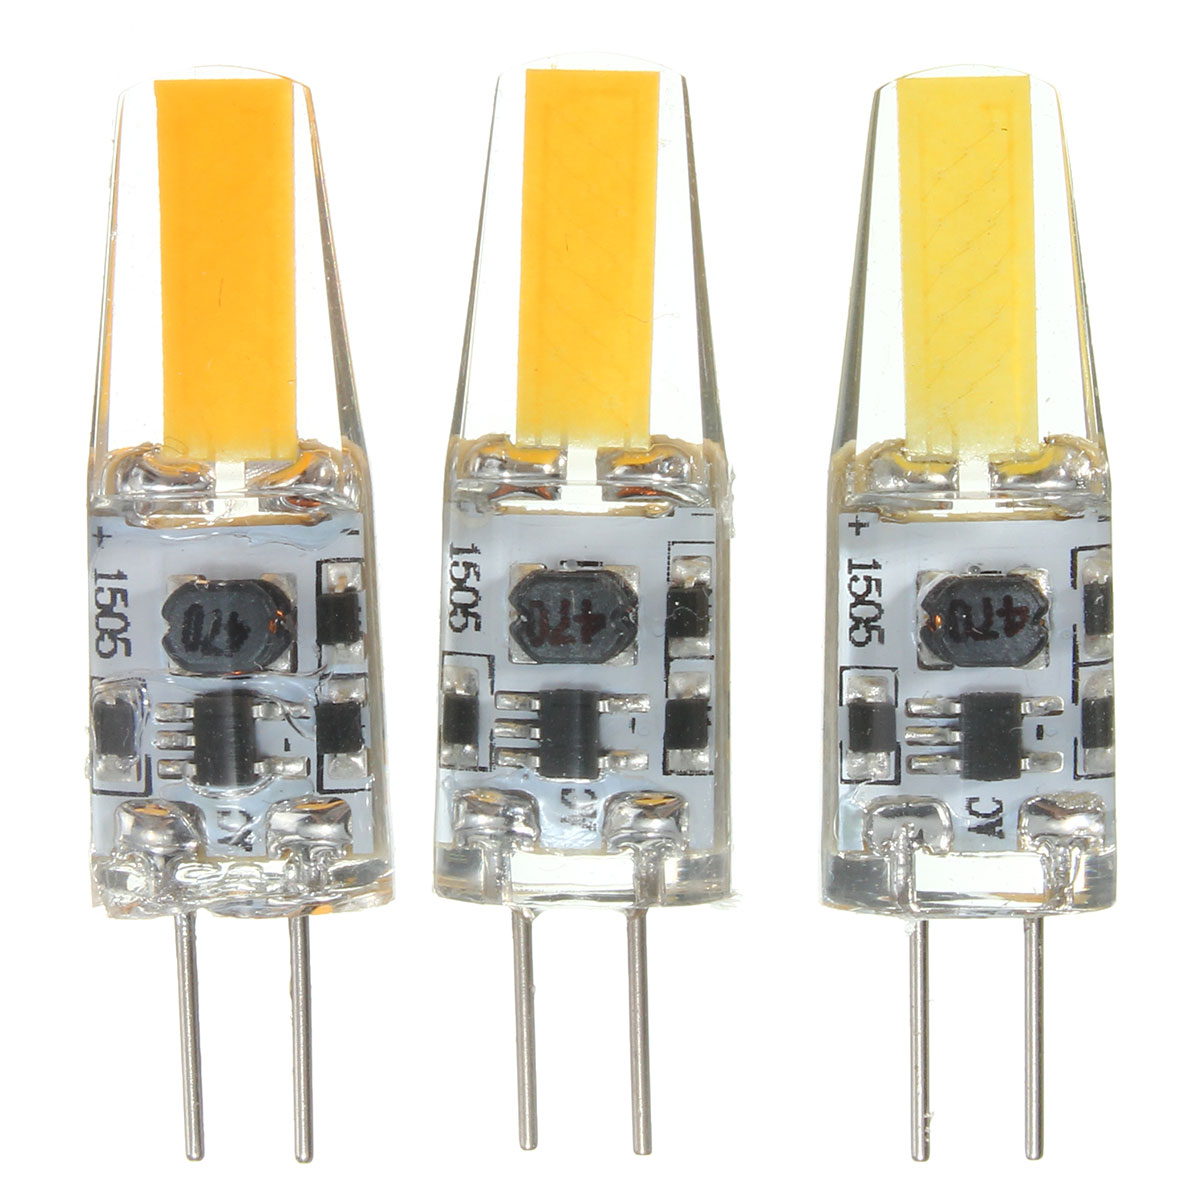 G4-2W-COB-LED-Crystal-Light-Silicone-Bulb-Pure-White-Warm-White-Cold-White-Lamp-For-Home-DC-12V-1060797-7